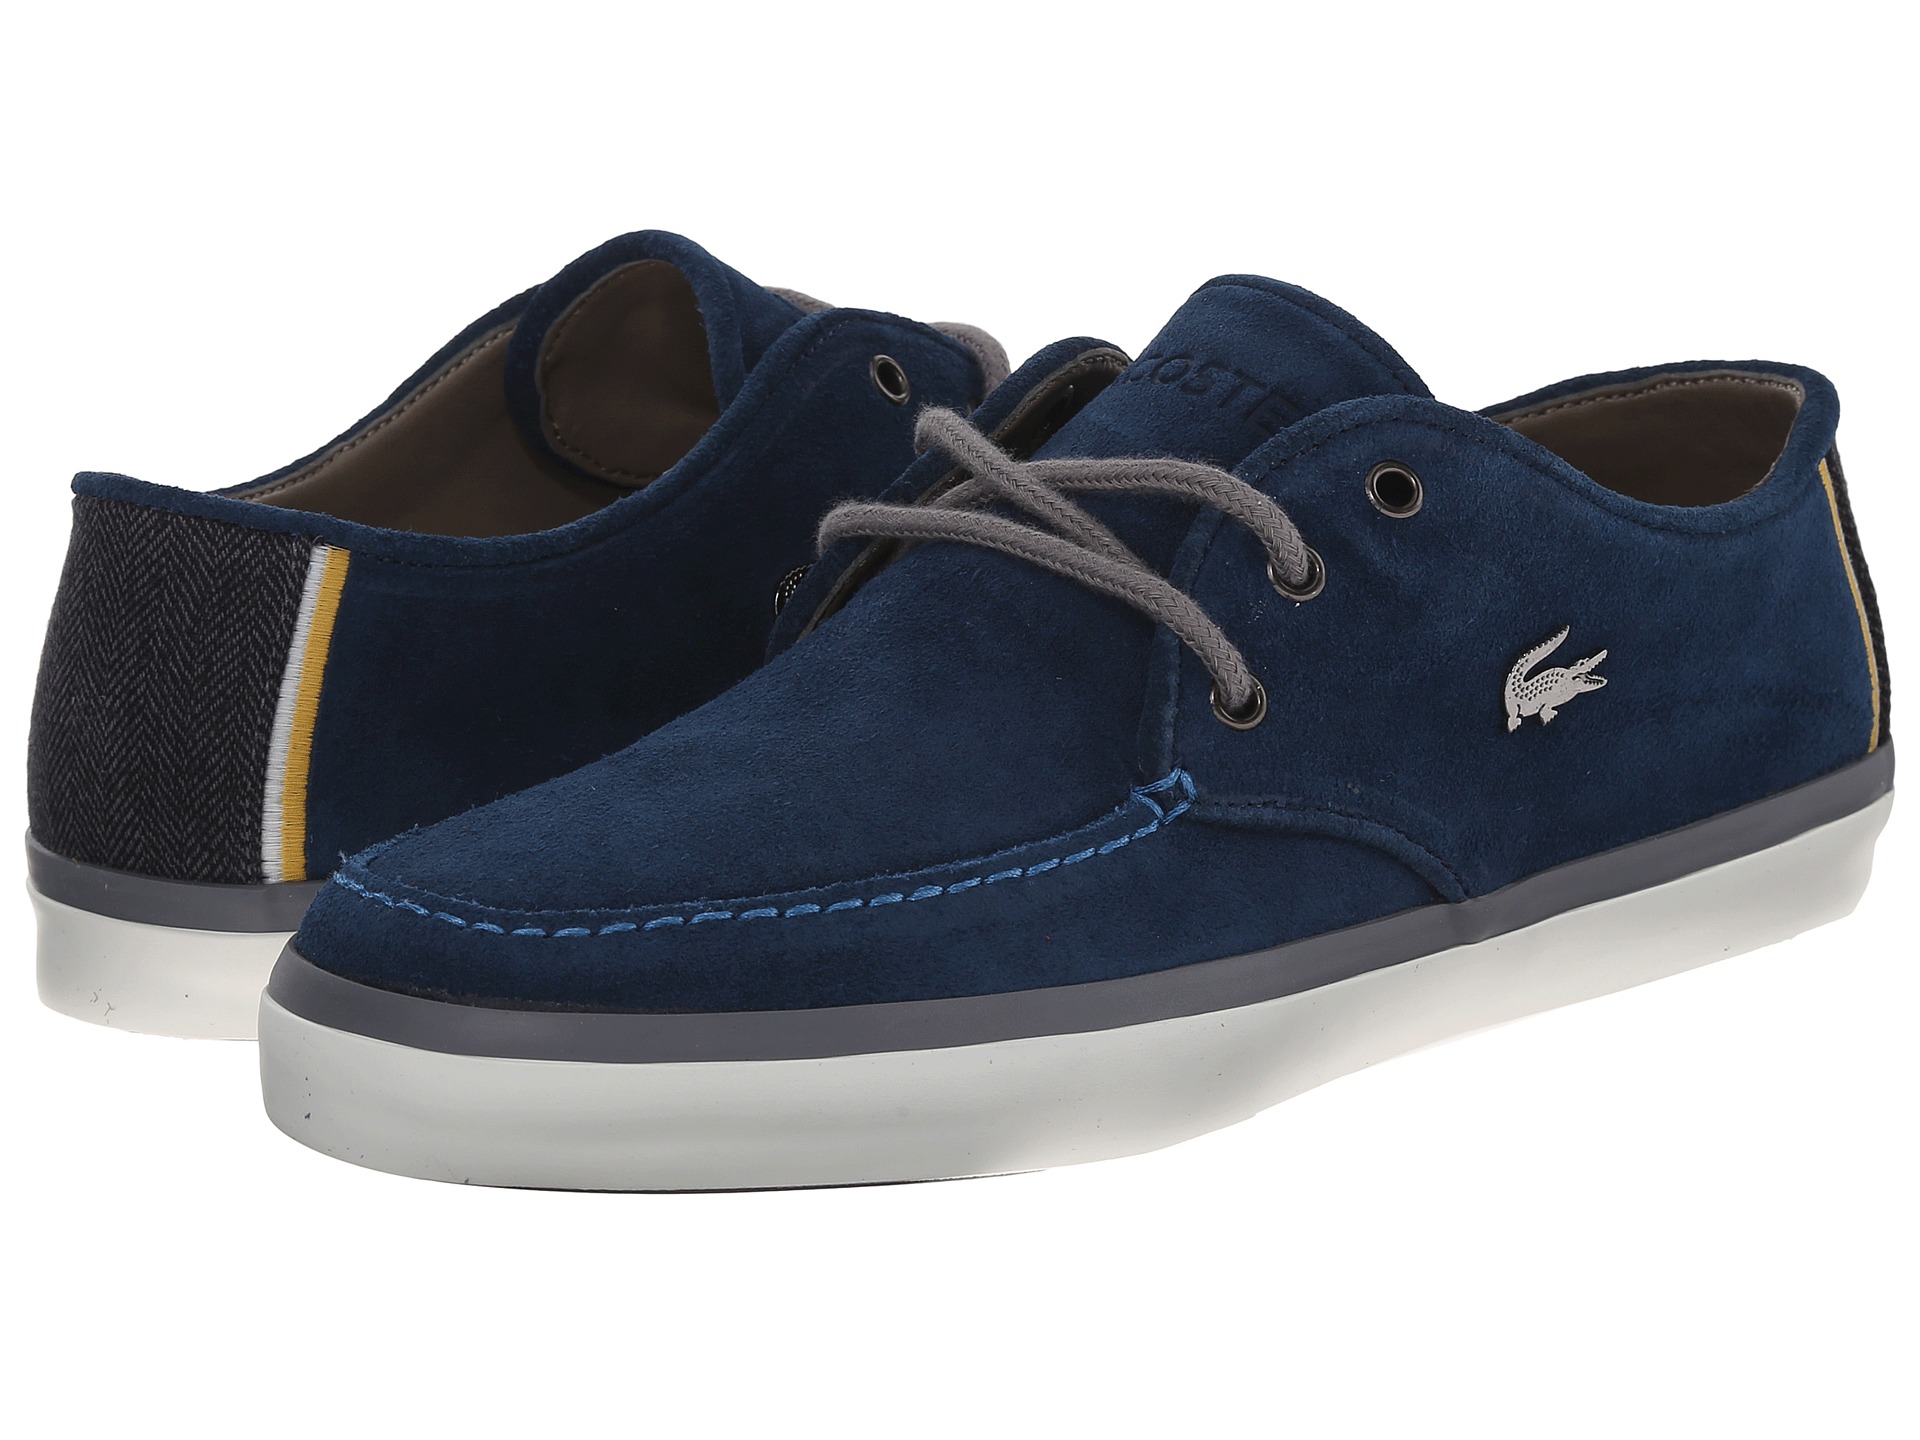 Lacoste Sevrin 10 - Zappos.com Free Shipping BOTH Ways